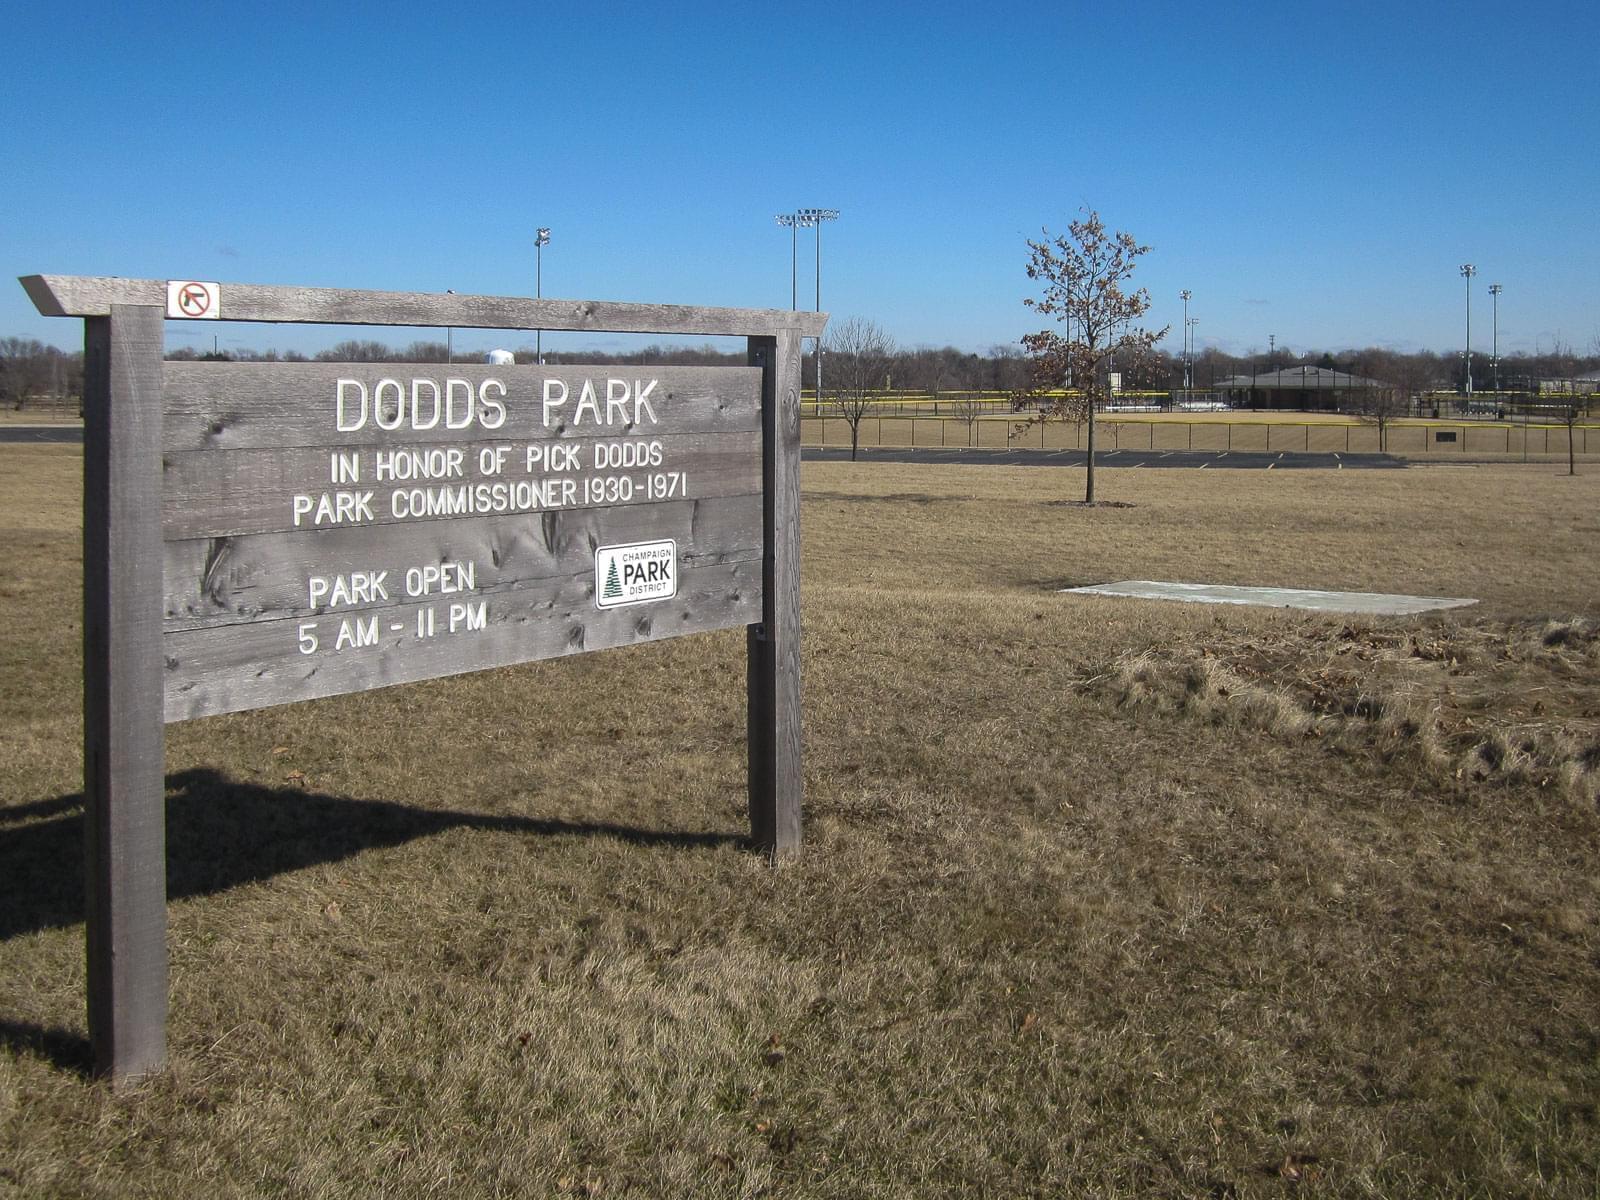 The 40-acre soccer complex at Dodds Park is the potential site for a new Central High School.